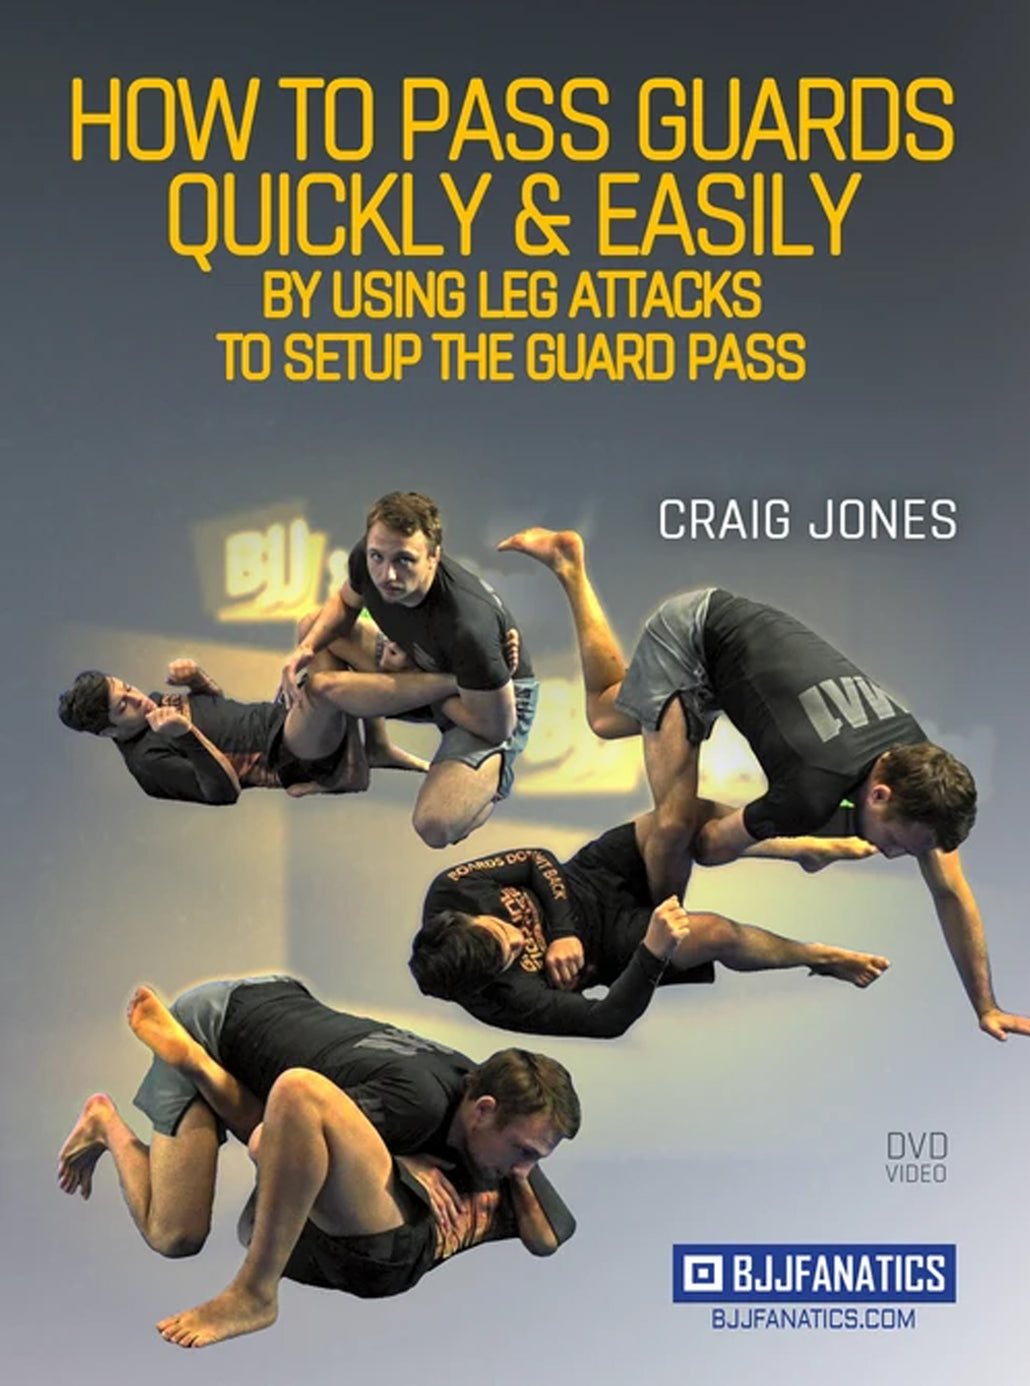 How to Pass Guards Quickly and Easily Using Leg Attacks by Craig Jones